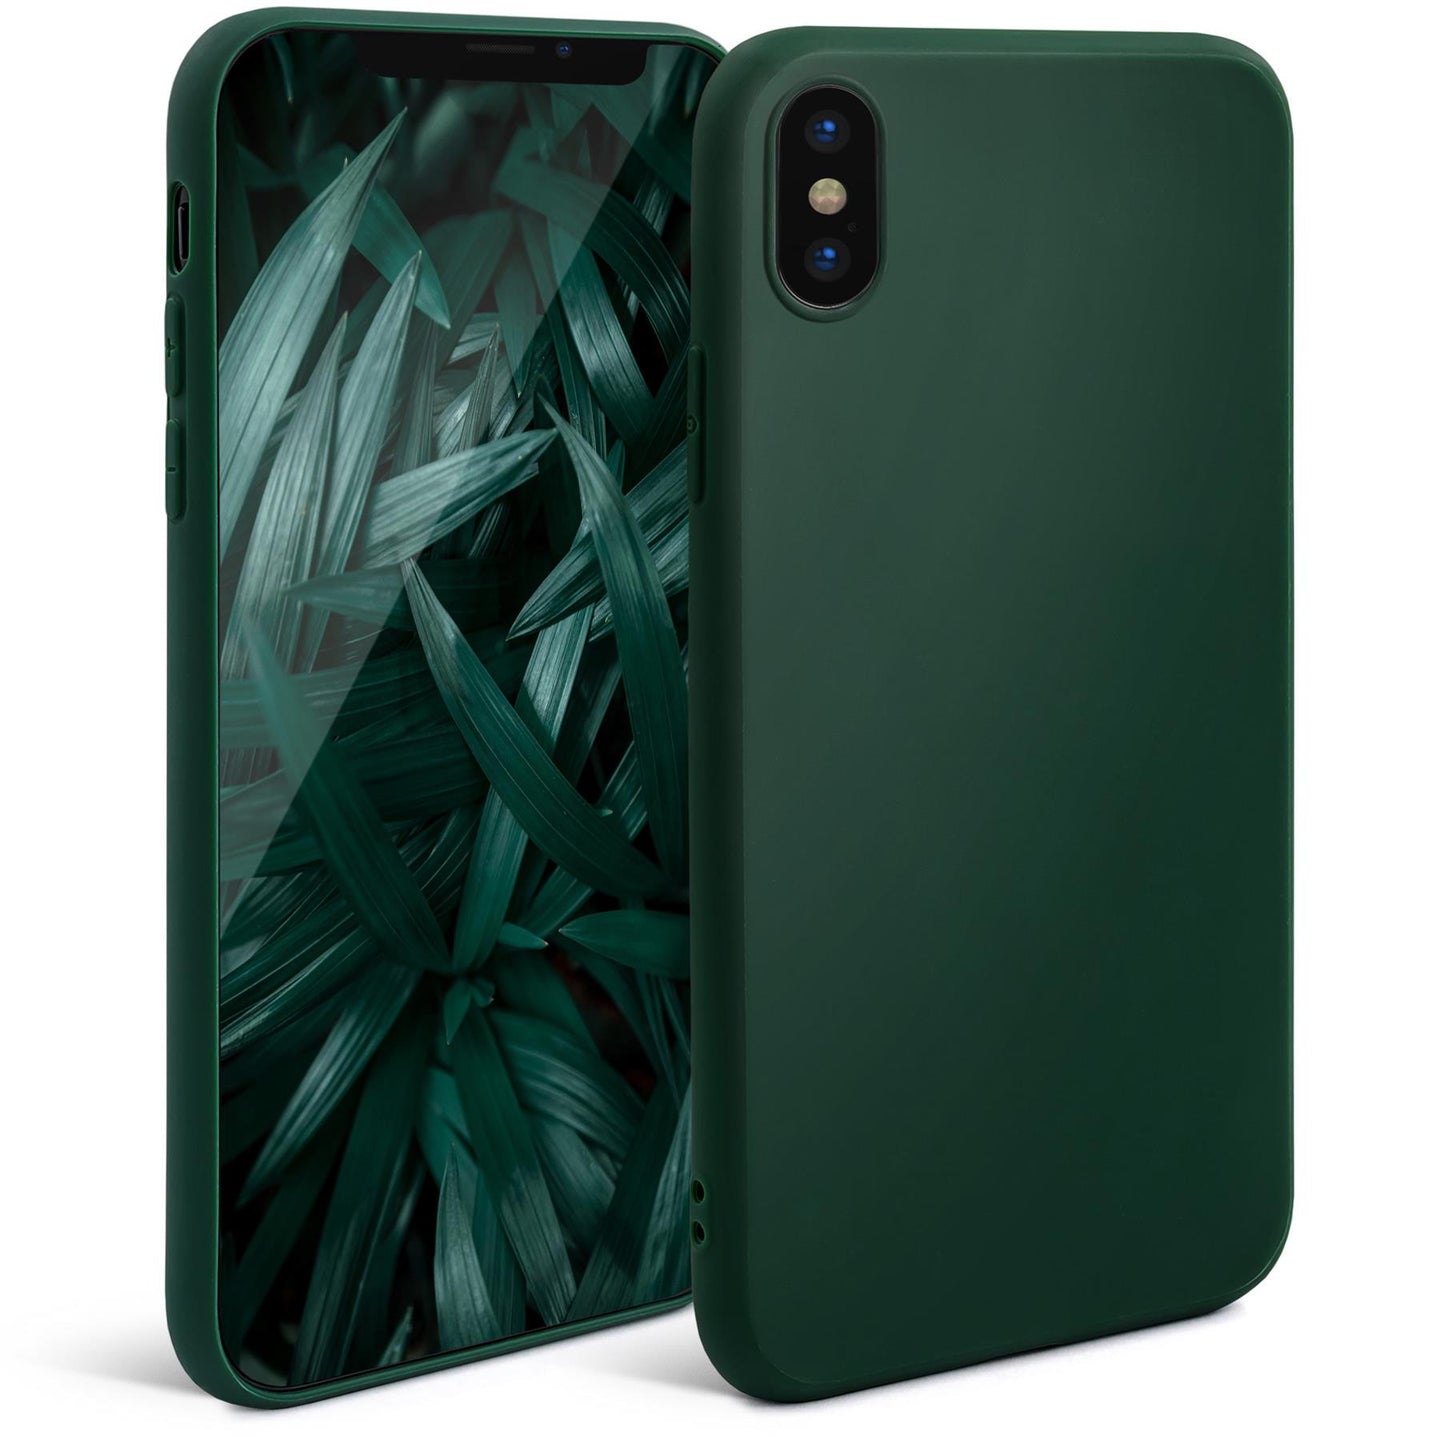 Moozy Minimalist Series Silicone Case for iPhone X and iPhone XS, Midnight Green - Matte Finish Slim Soft TPU Cover